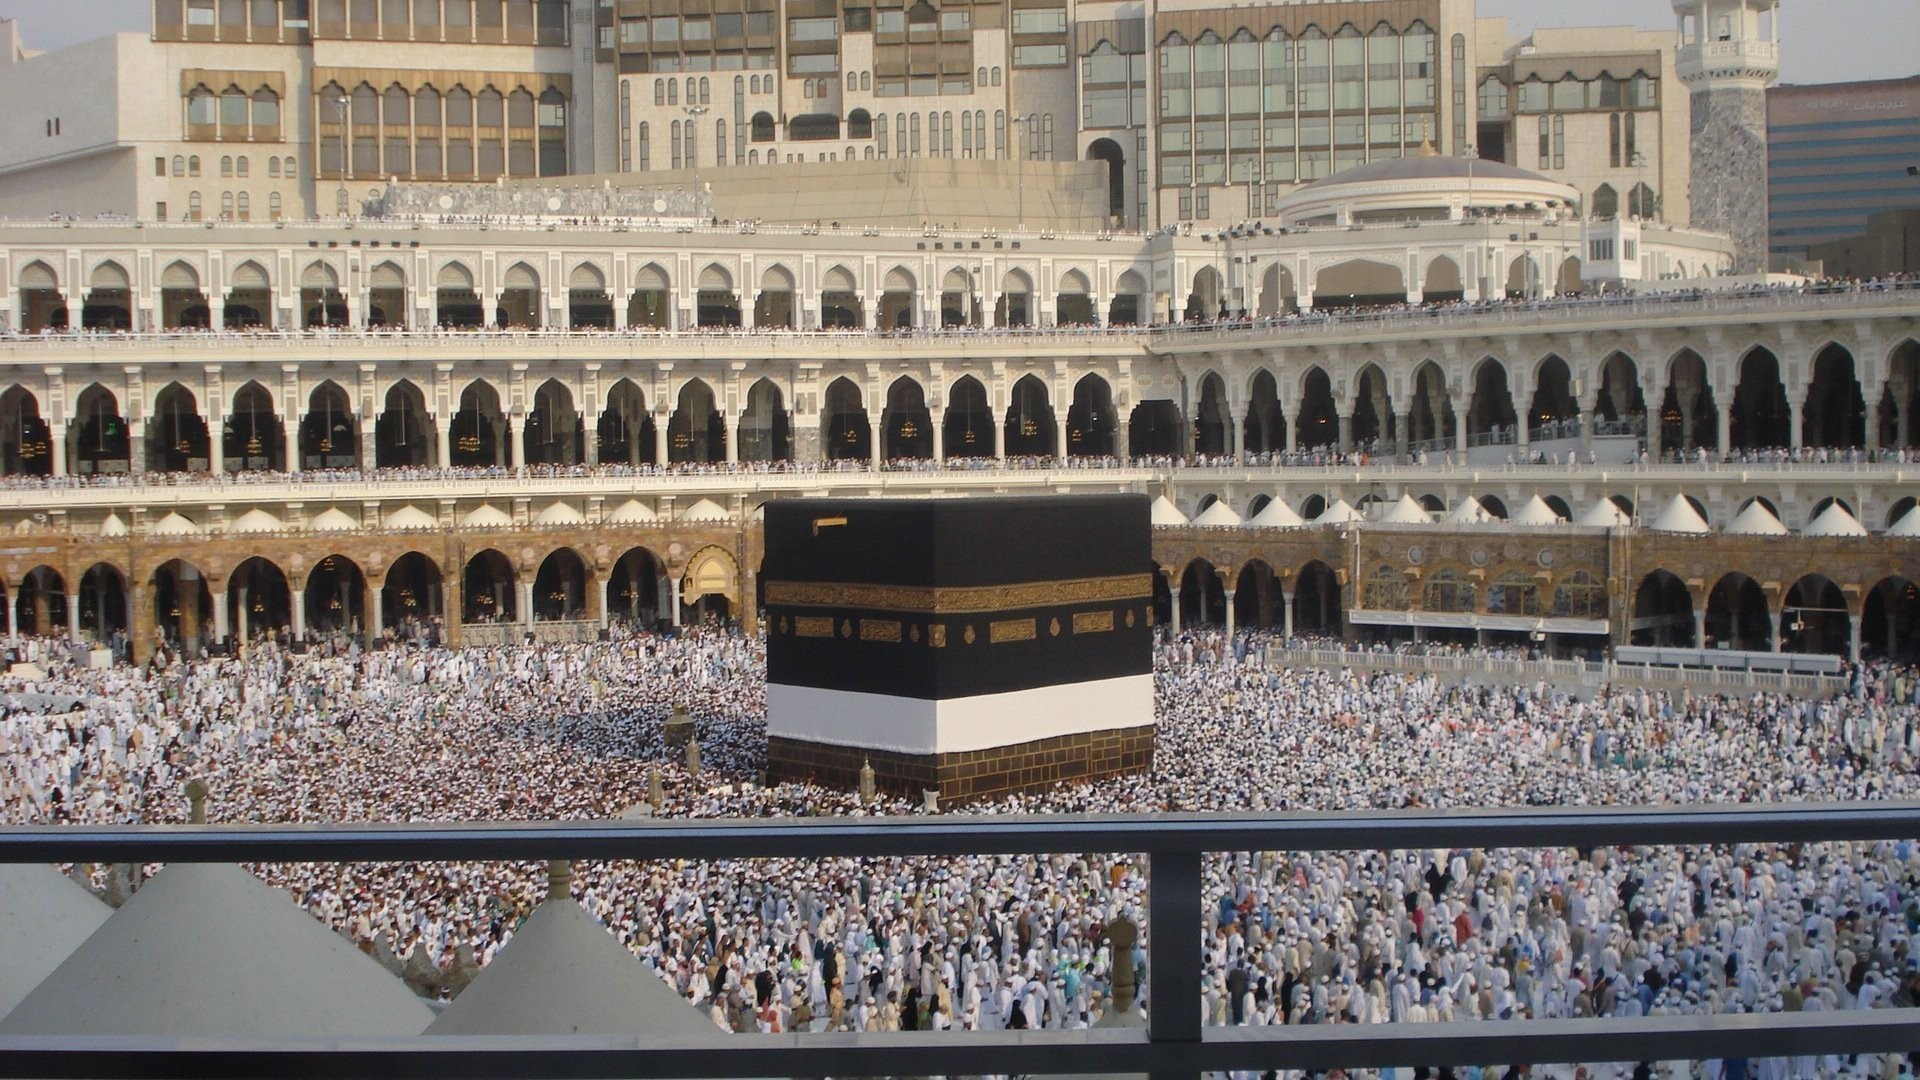 100+] Kaaba Pictures | Wallpapers.com